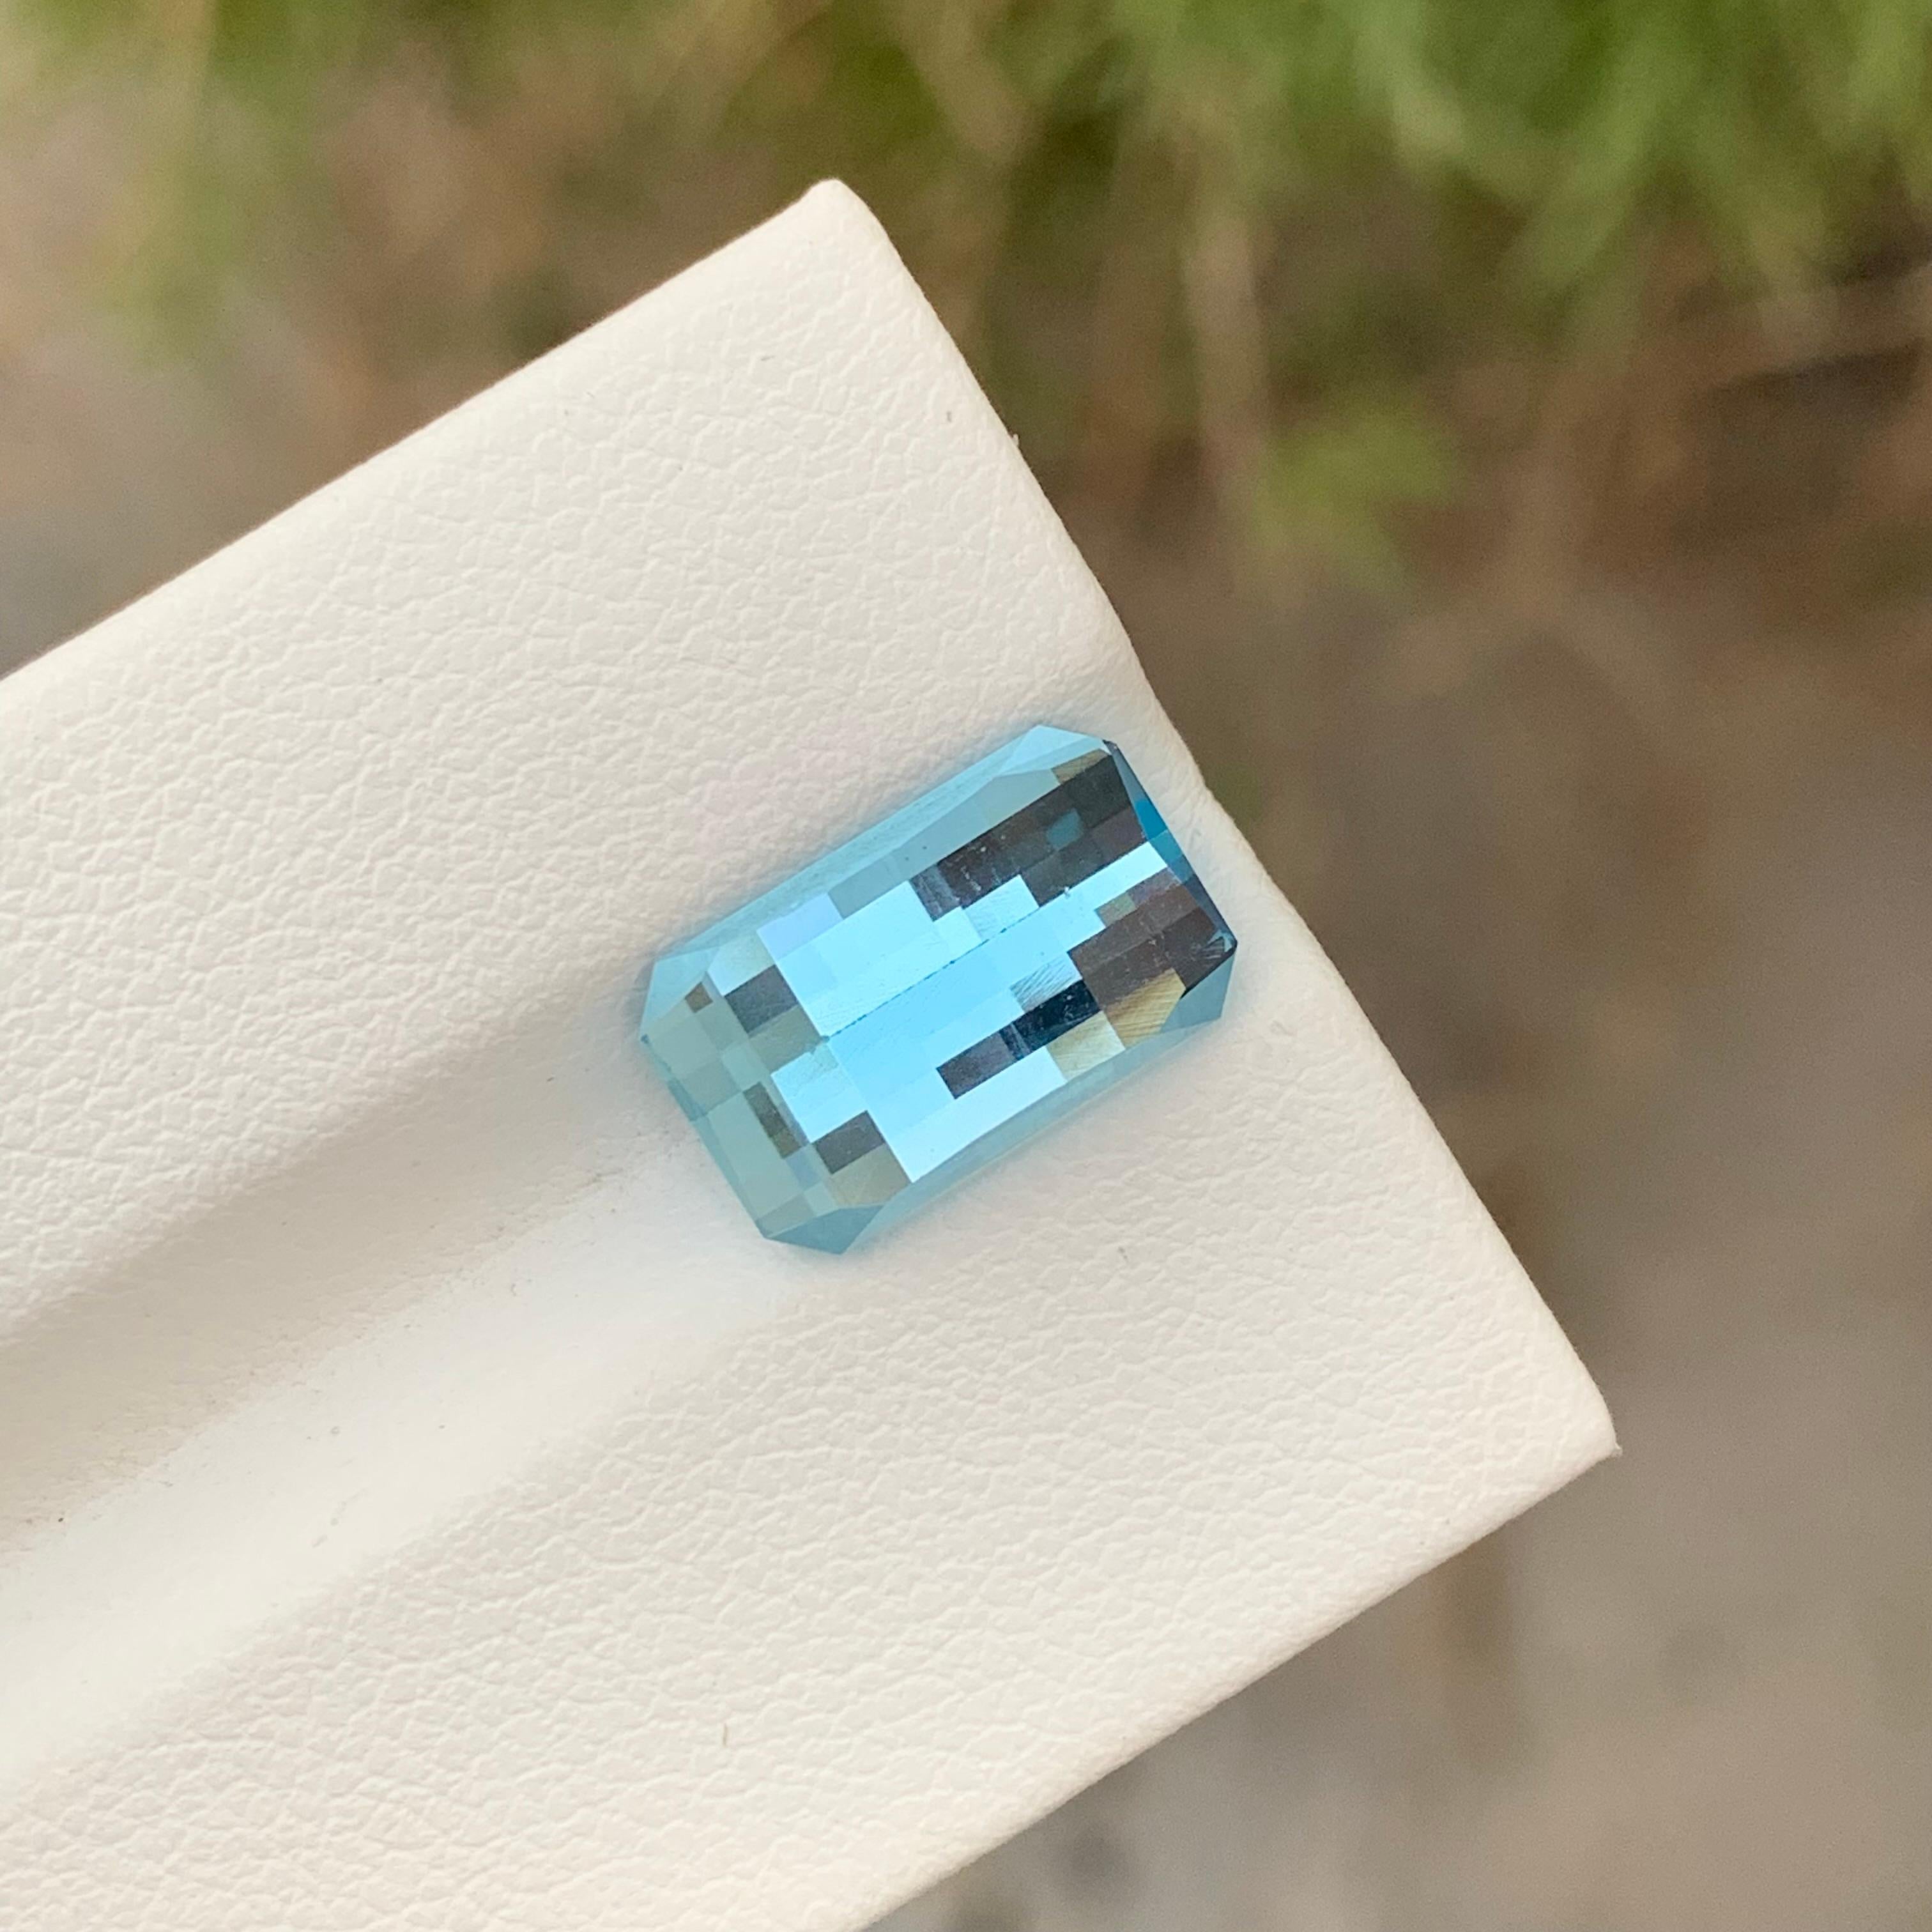 Stunning 6.15 Carats Pixelated Cut Loose Sky Blue Topaz Earth Mine Ring Gem For Sale 2